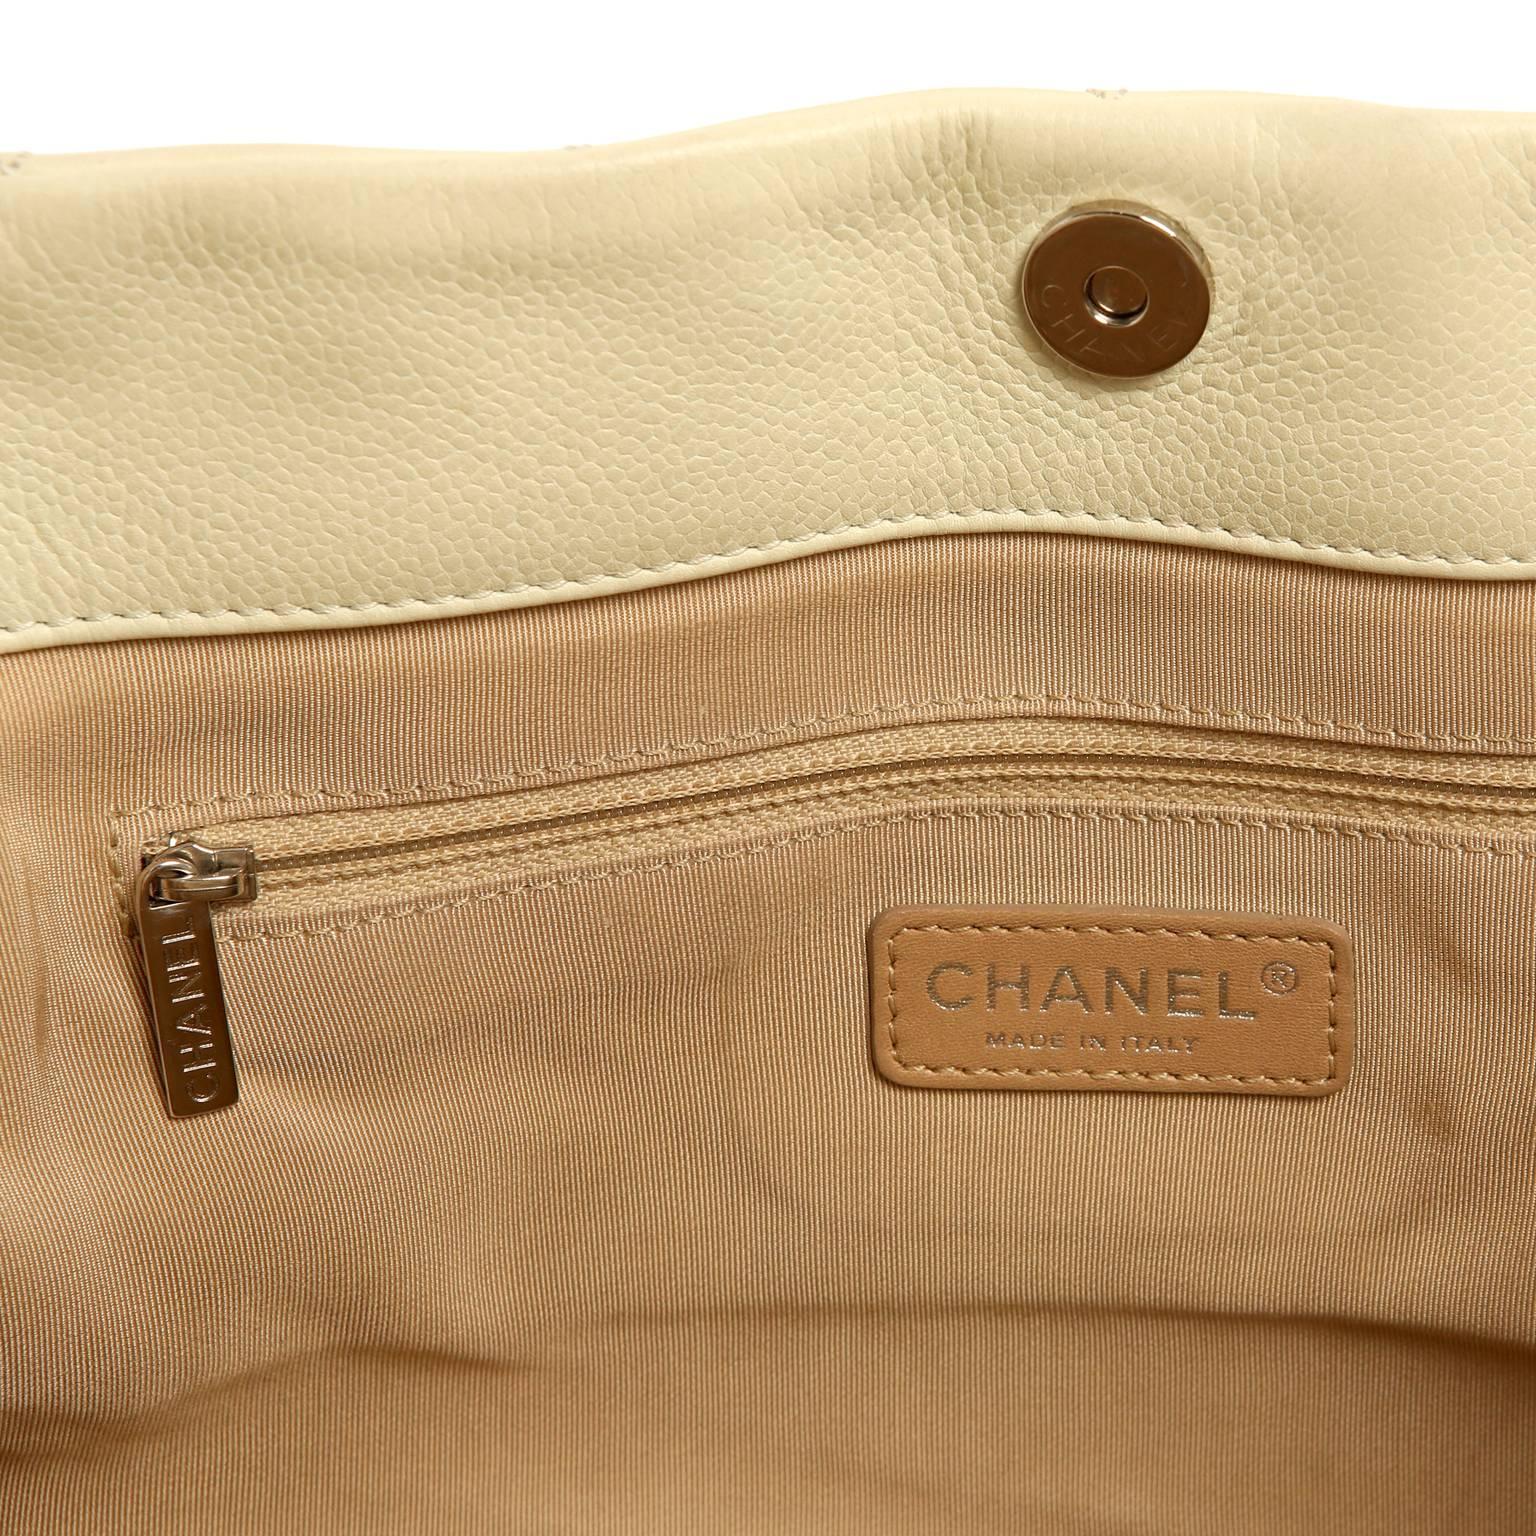 Chanel Ivory Leather Zip Around Expandable Tote Shoulder Bag 3